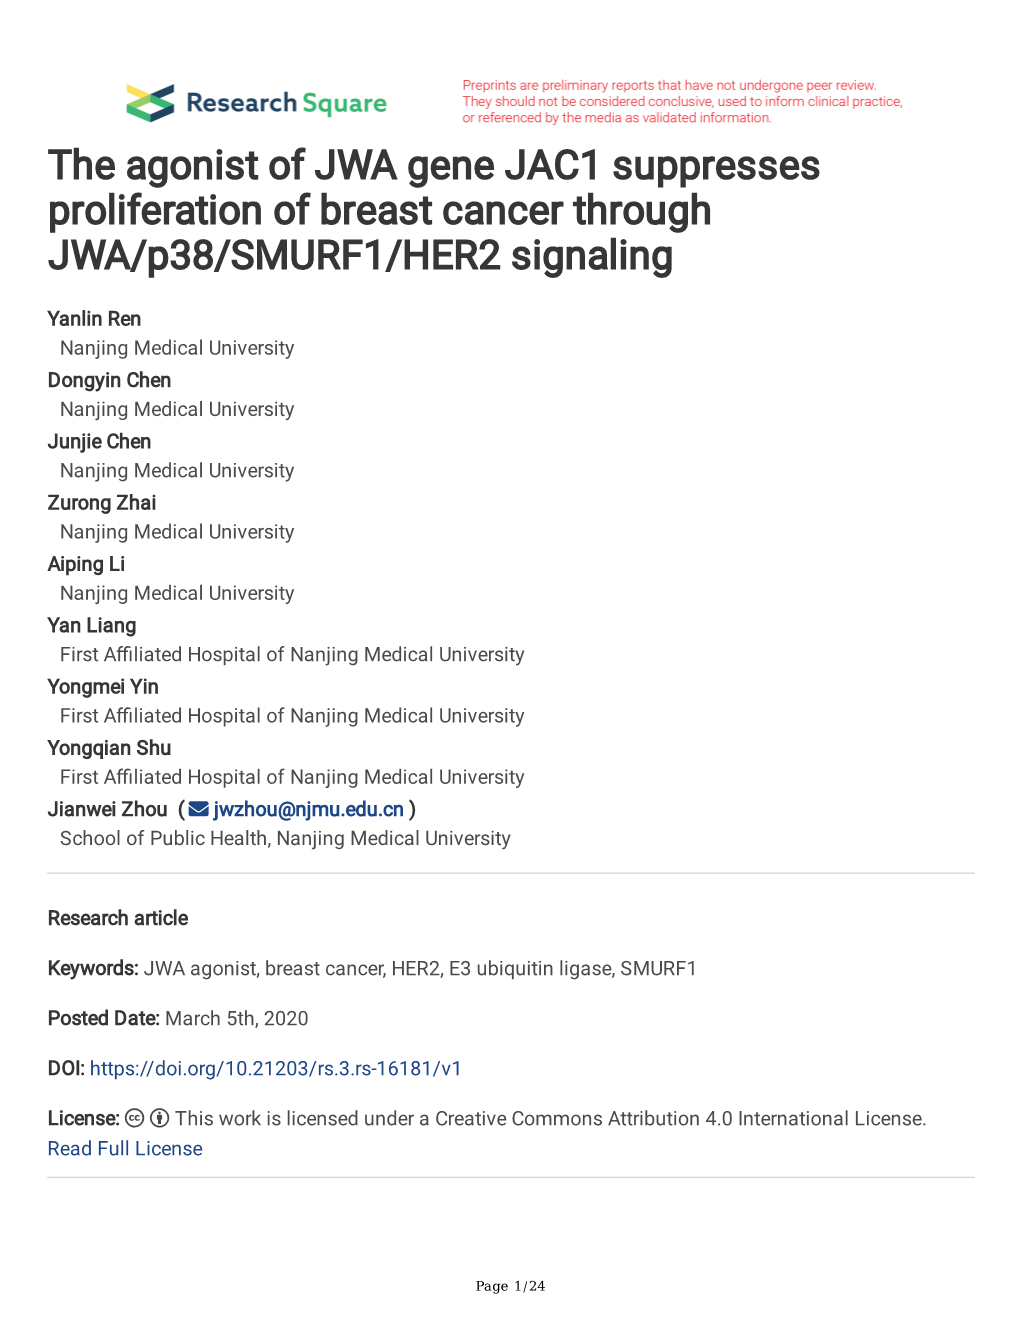 The Agonist of JWA Gene JAC1 Suppresses Proliferation of Breast Cancer Through JWA/P38/SMURF1/HER2 Signaling